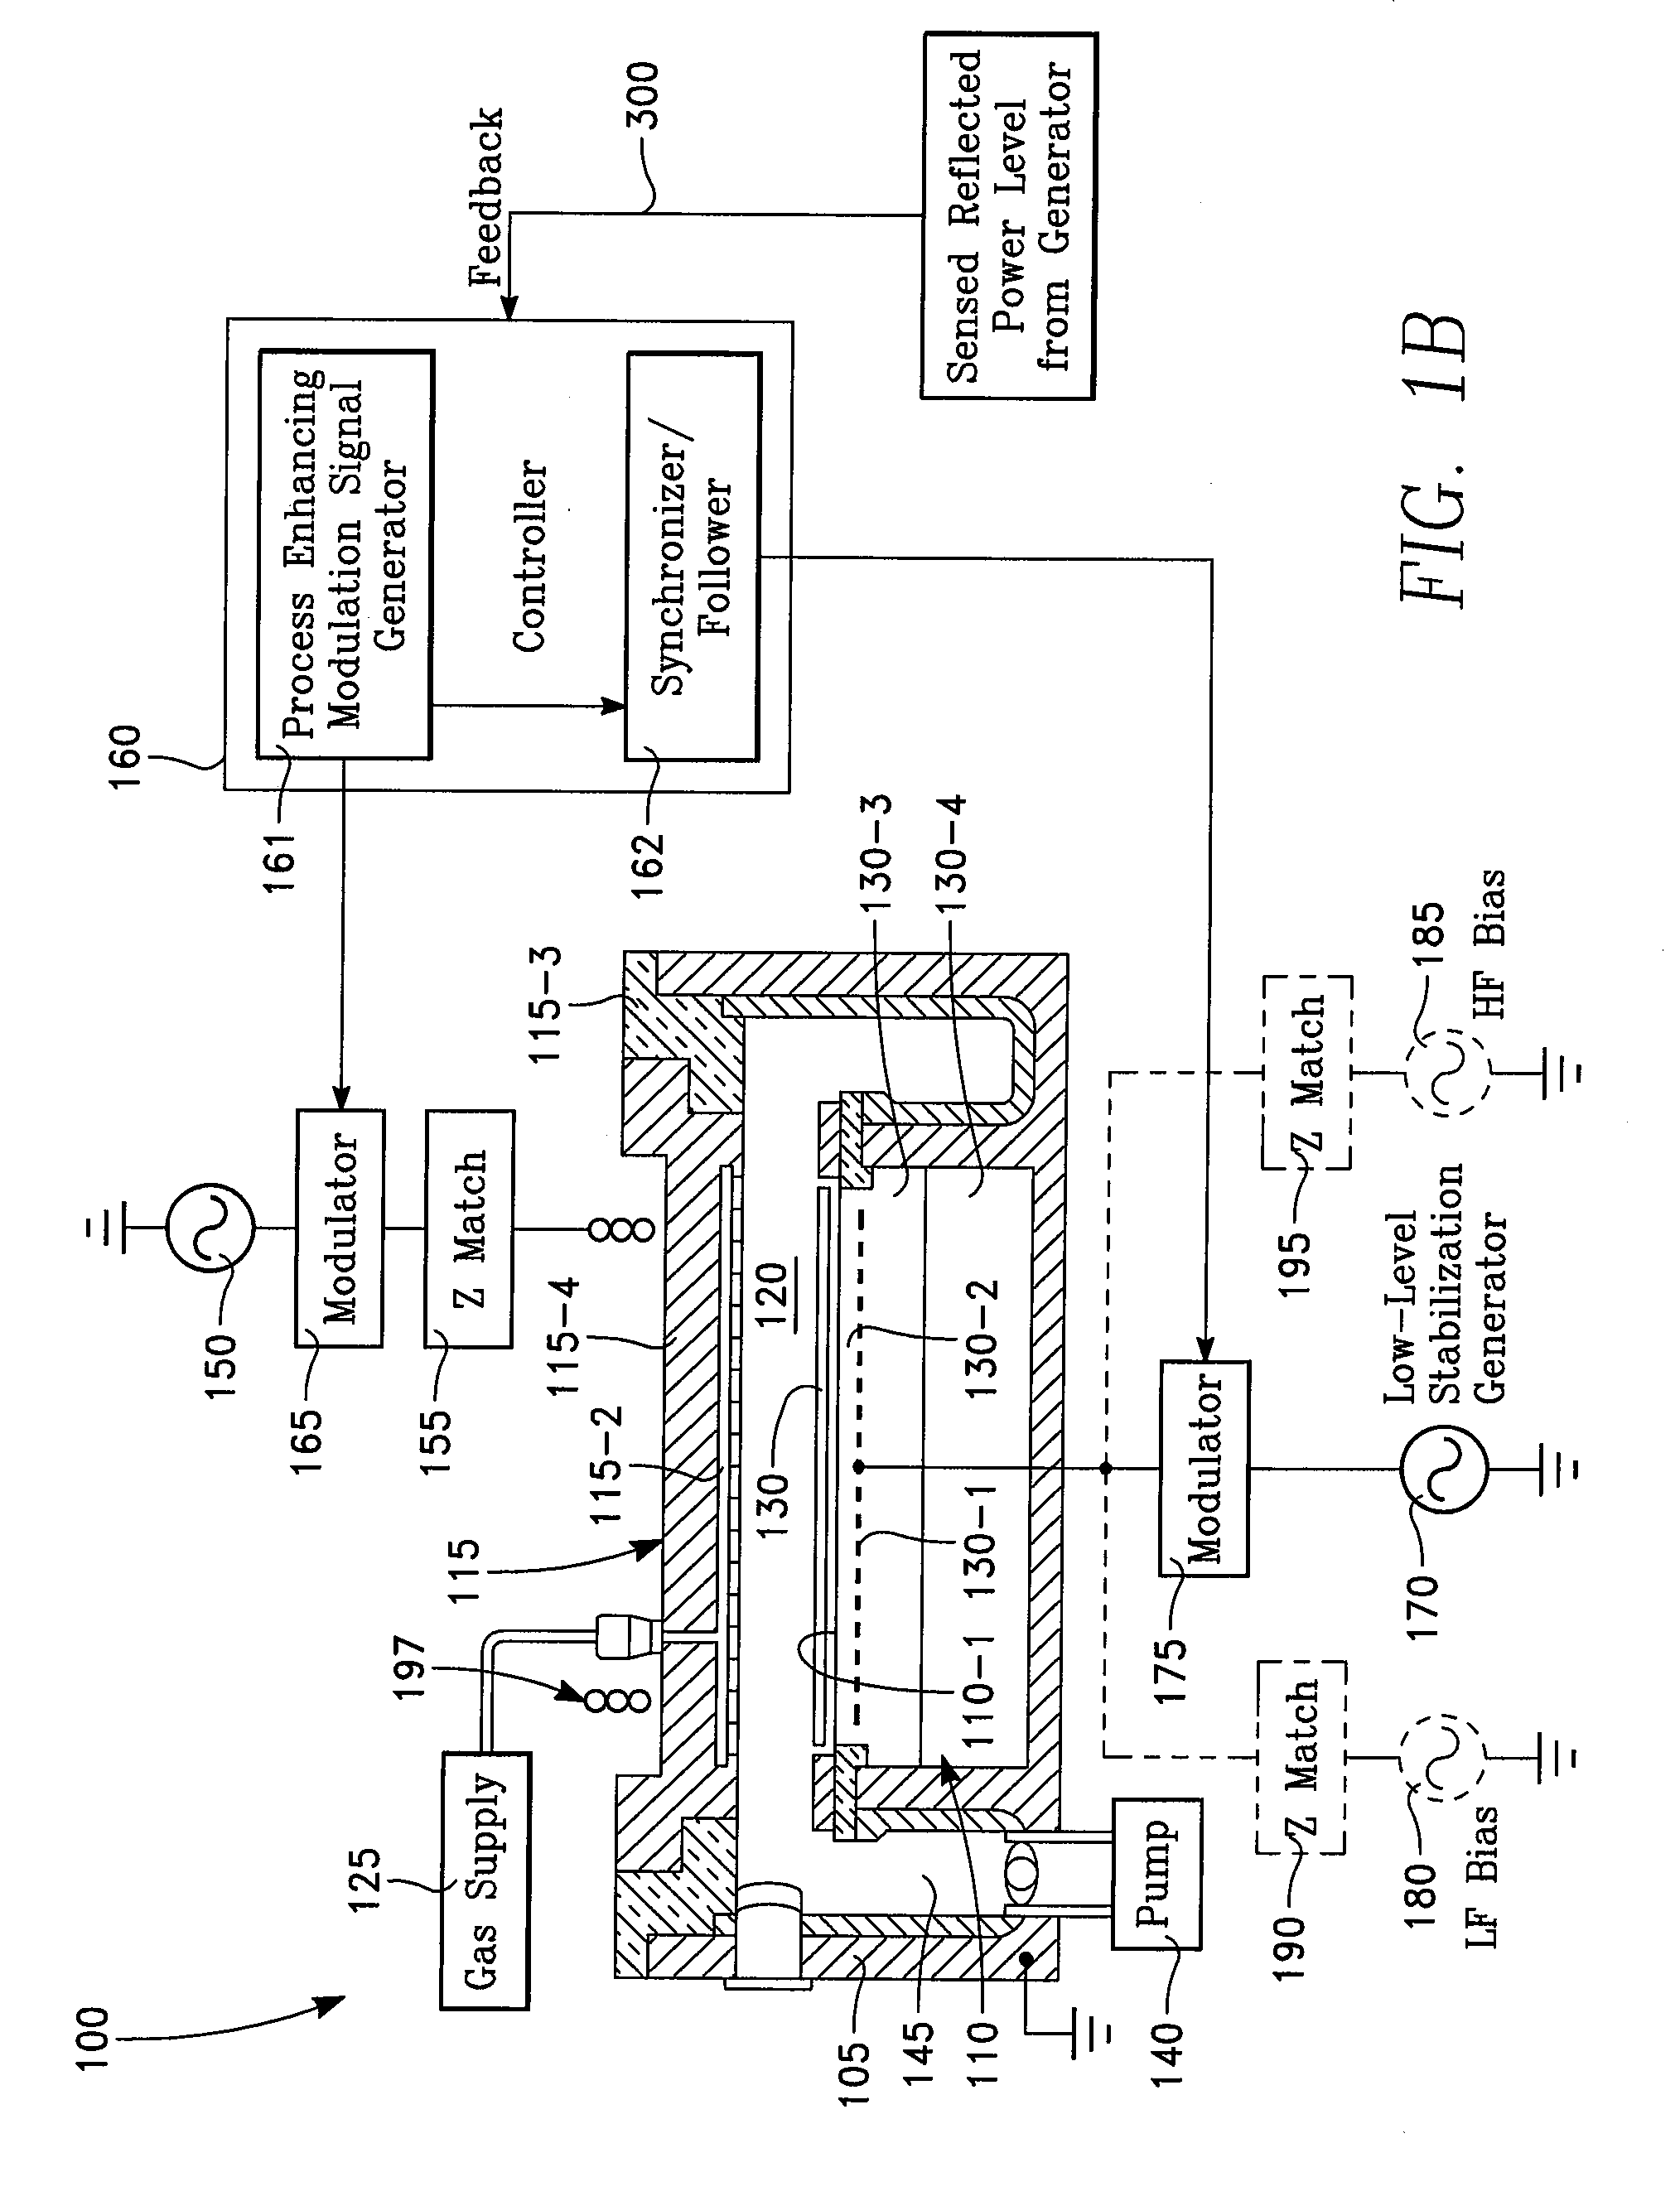 Method of plasma load impedance tuning for engineered transients by synchronized modulation of an unmatched low power RF generator